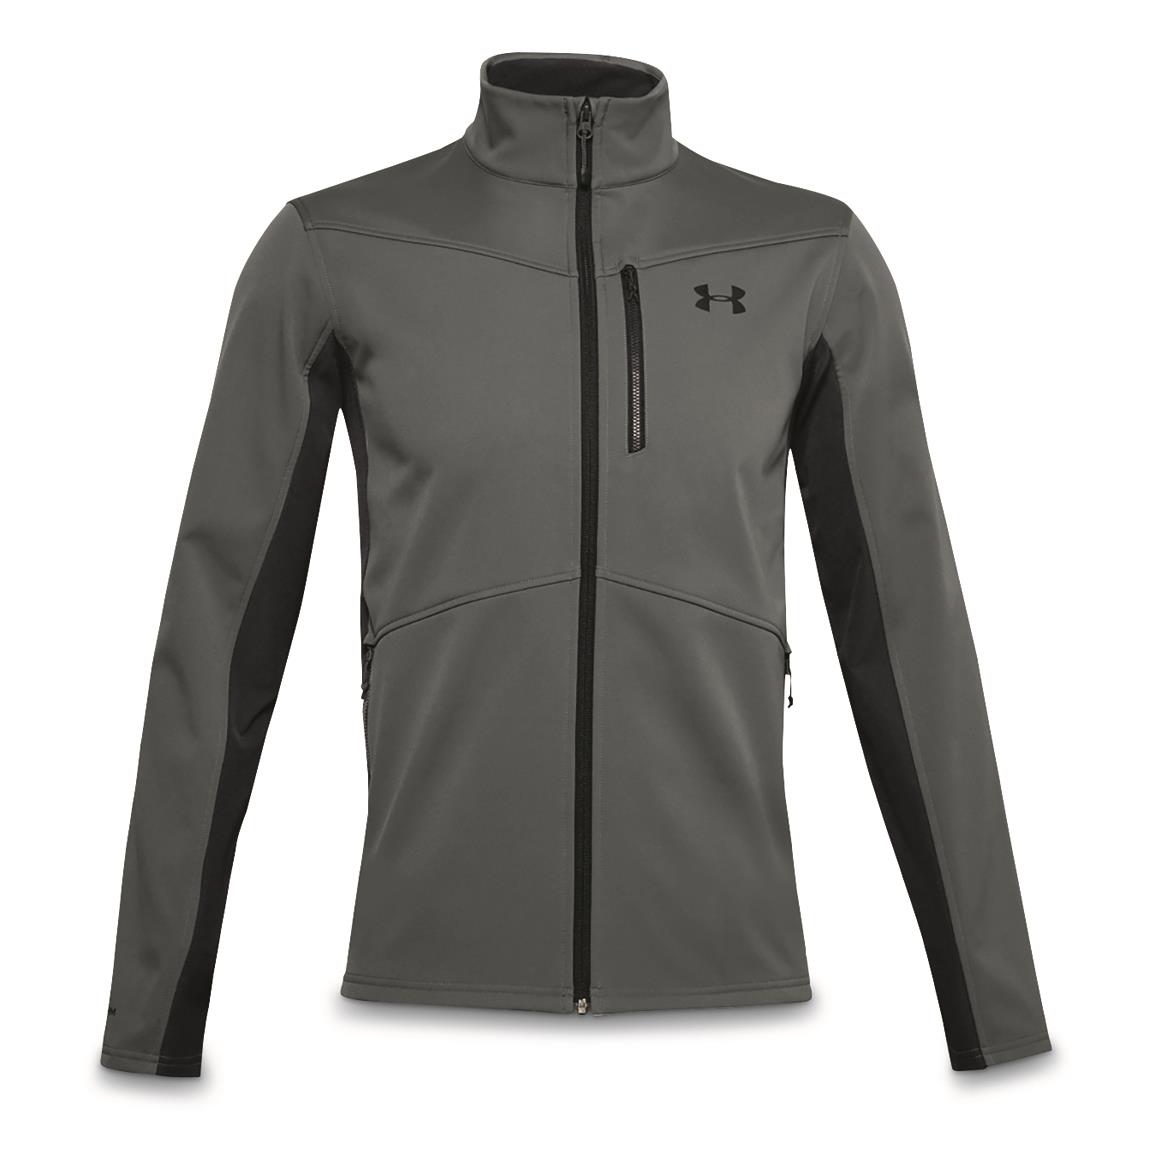 Under Armour Men's ColdGear Infrared Shield Jacket, Pitch Gray/pitch Gray/black